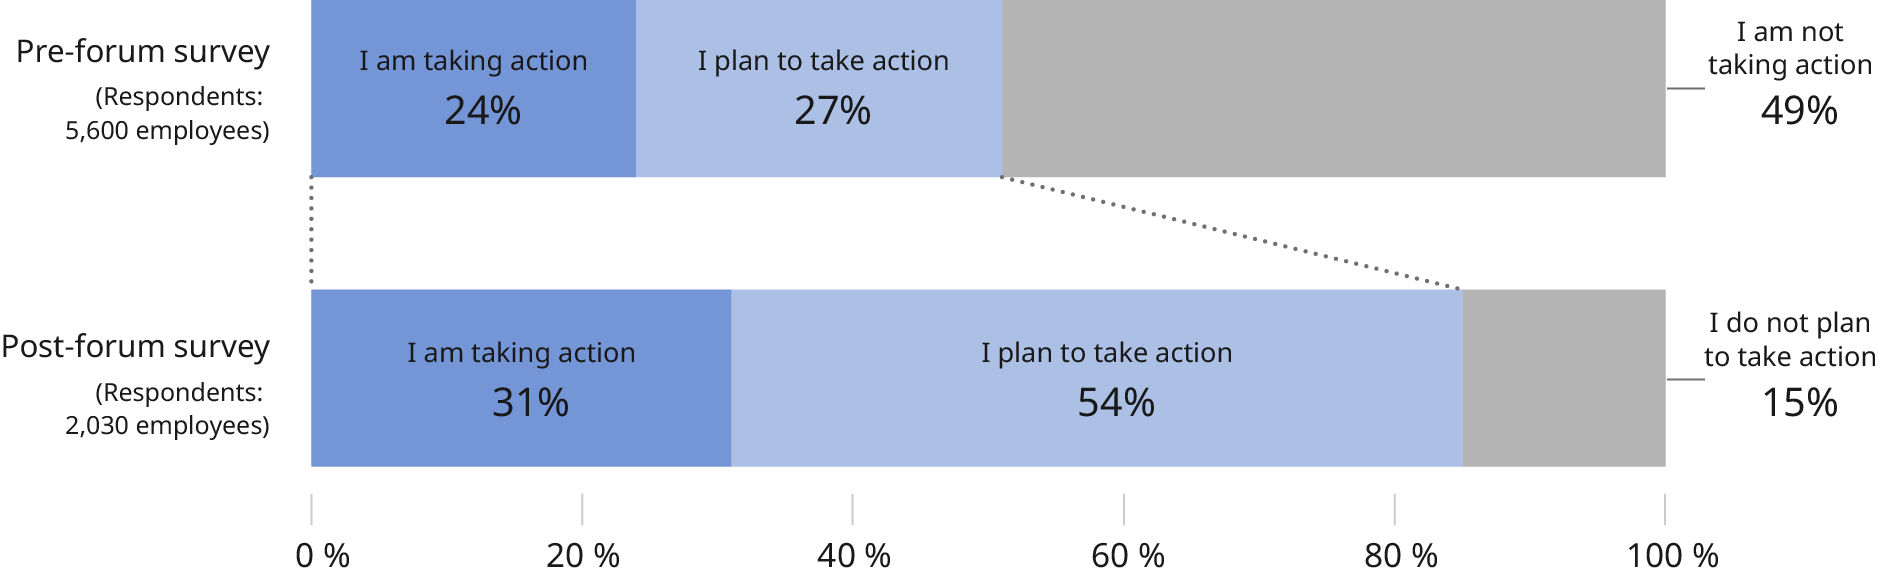 Figure: Results of the pre- and post-forum surveys to the question, "Are you taking any actions to promote DEI?" There were 5,600 respondents to the pre-forum survey. 24% answered that they are taking actions to promote DEI, 27% that they plan to take actions to promote it, and 49% that they are not taking actions to promote it. The number of respondents to the post-forum survey was 2,030. 31% answered that they are already taking actions to promote DEI, 54% that they plan to take actions to promote it, and 15% that they do not plan to take actions to promote it.